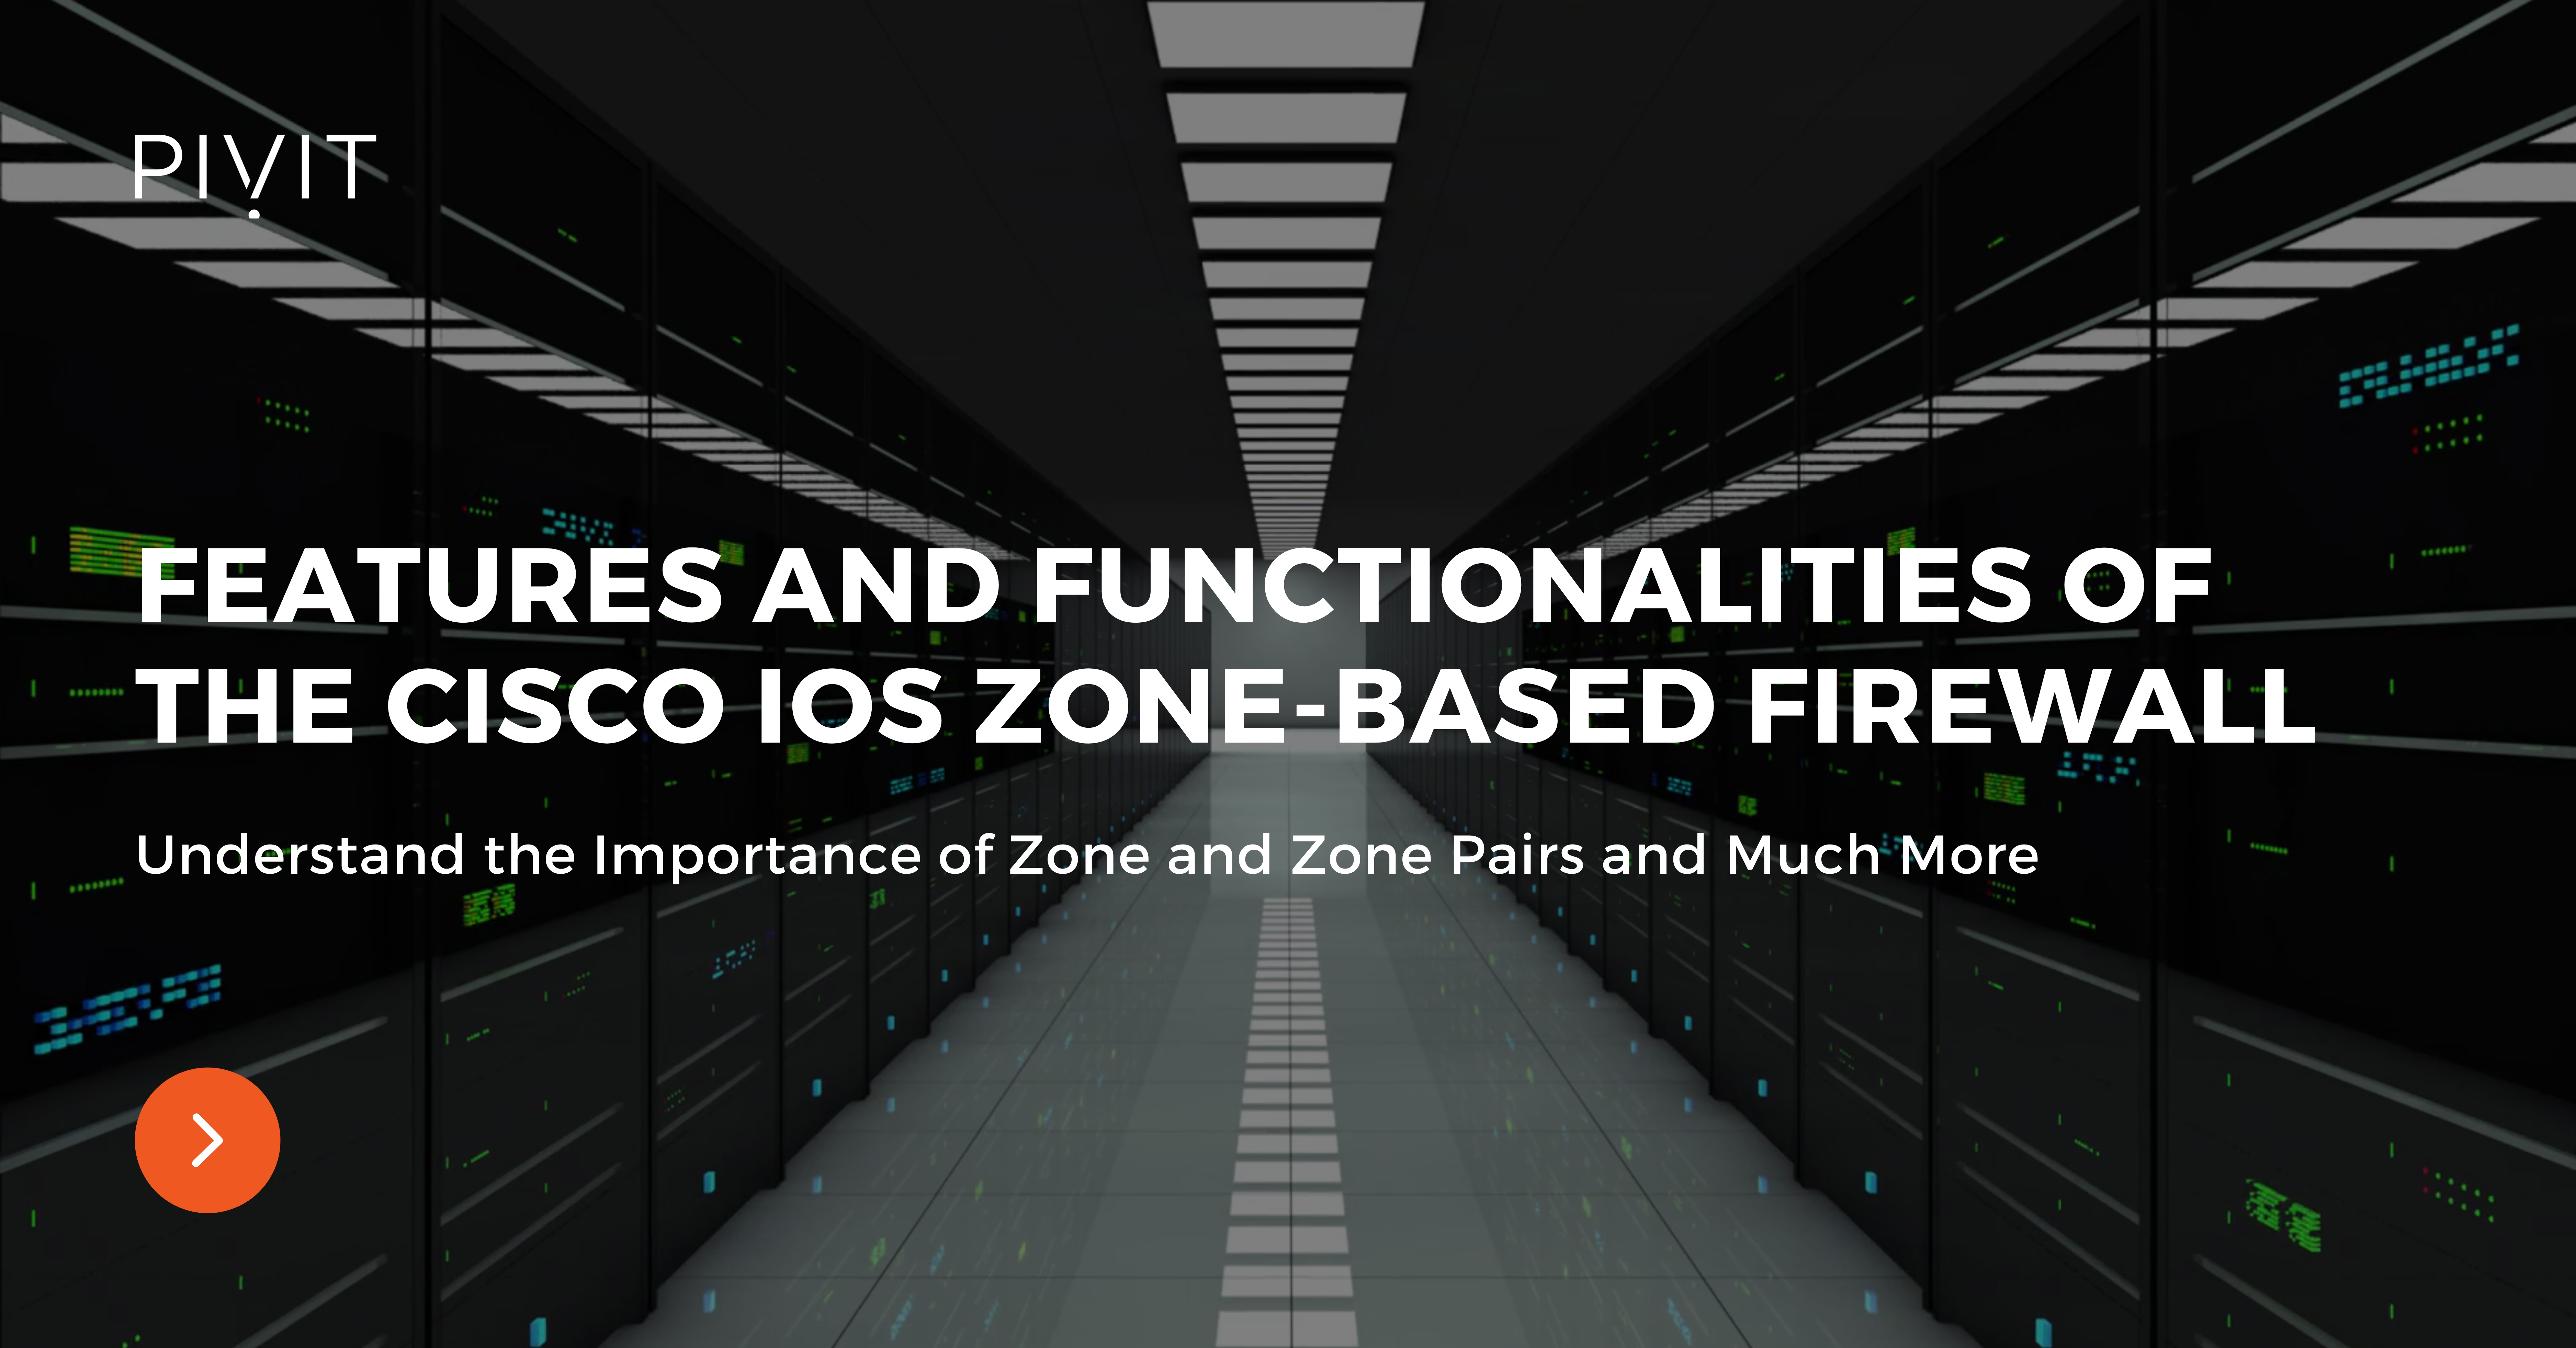 Features and Functionalities of the Cisco IOS Zone-Based Firewall